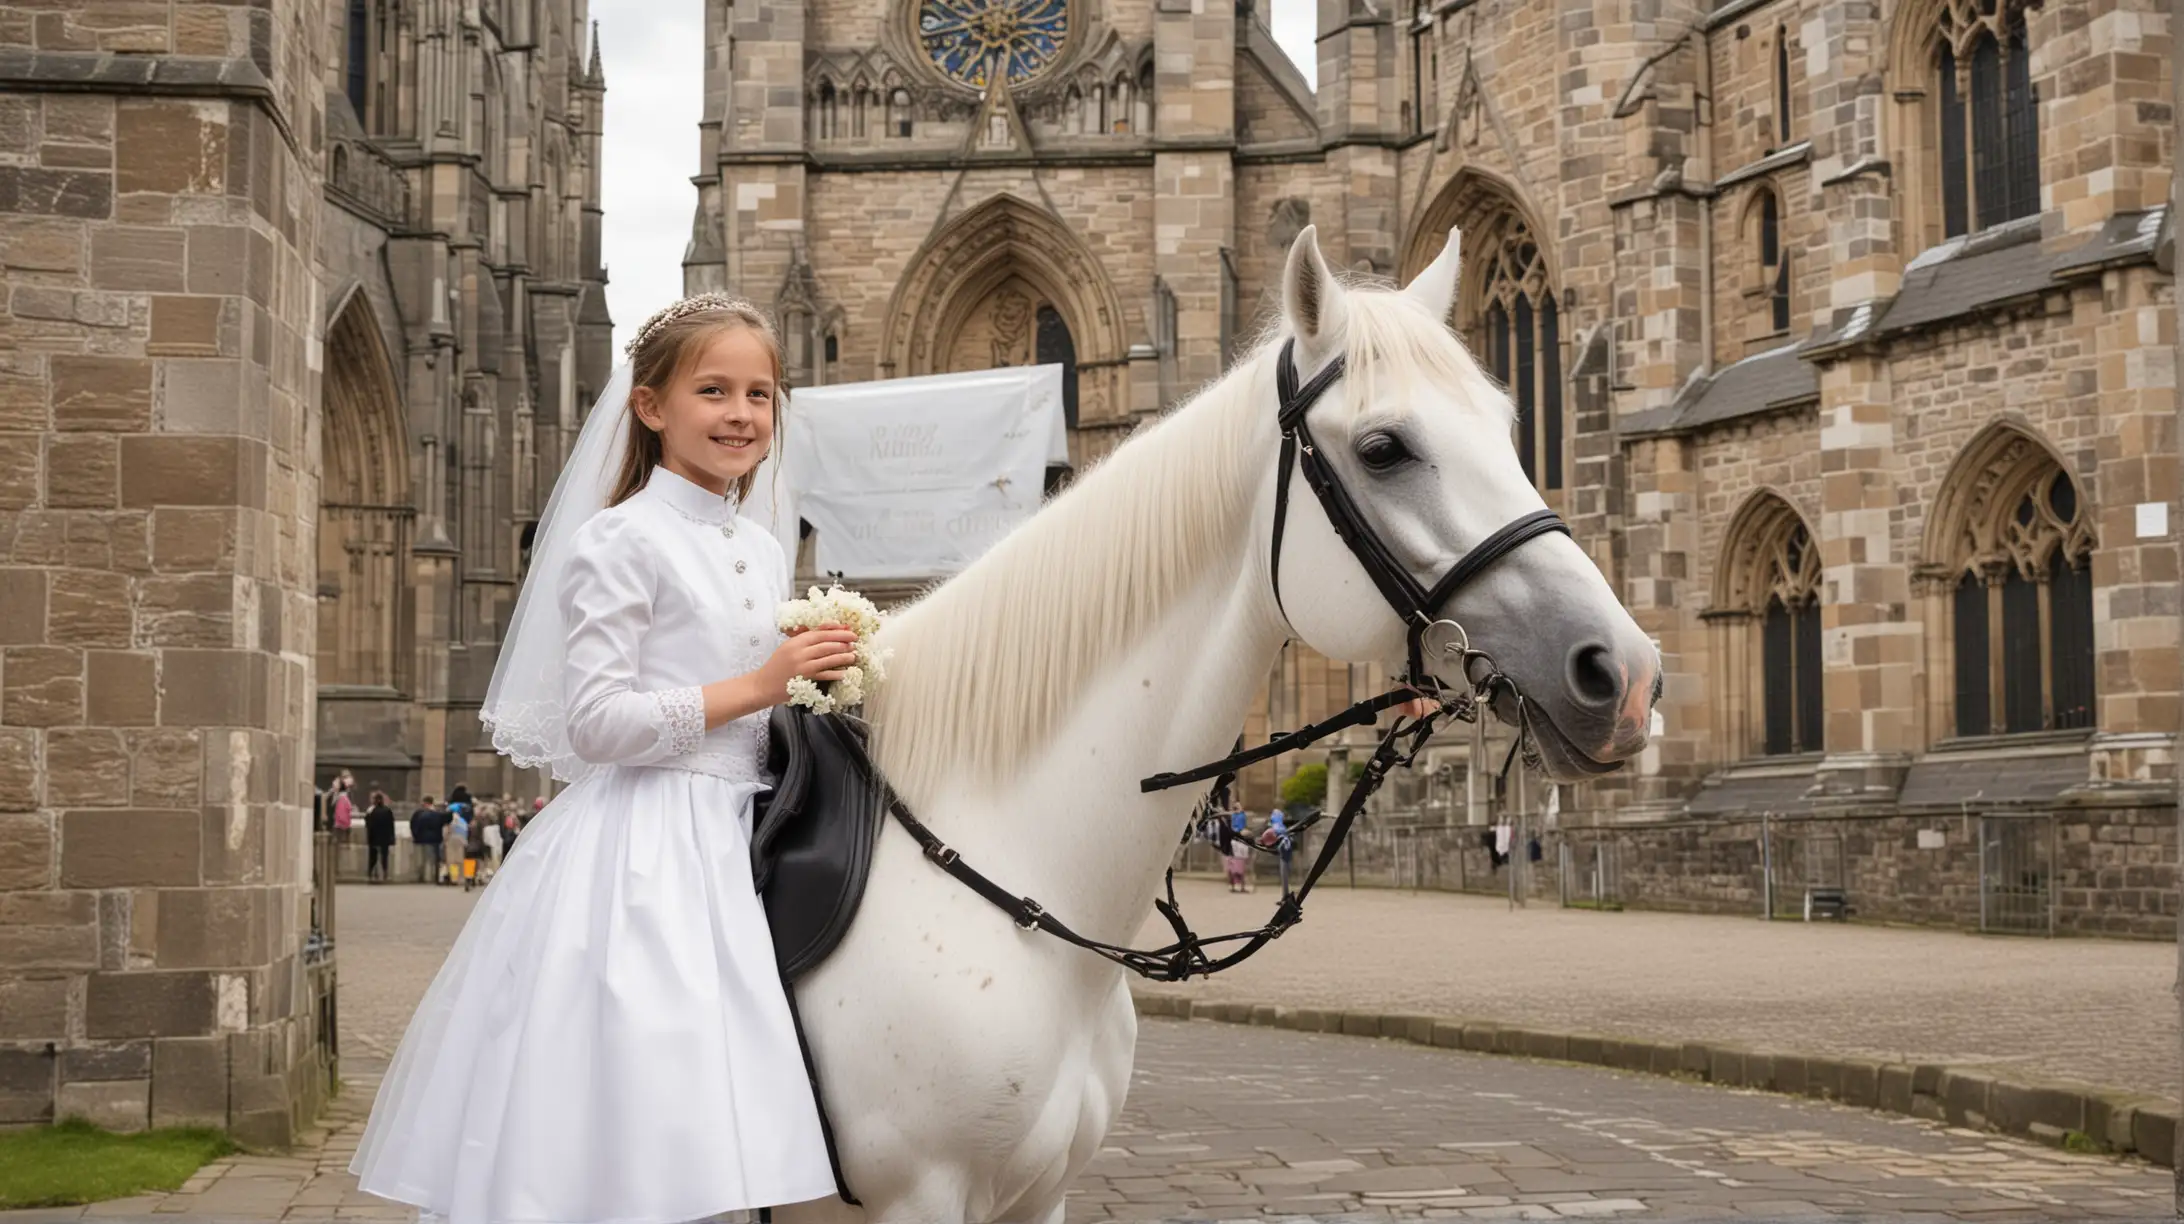 girl about 40 years old on a horse on her holy communion day
in front of a cathedral in Ireland 